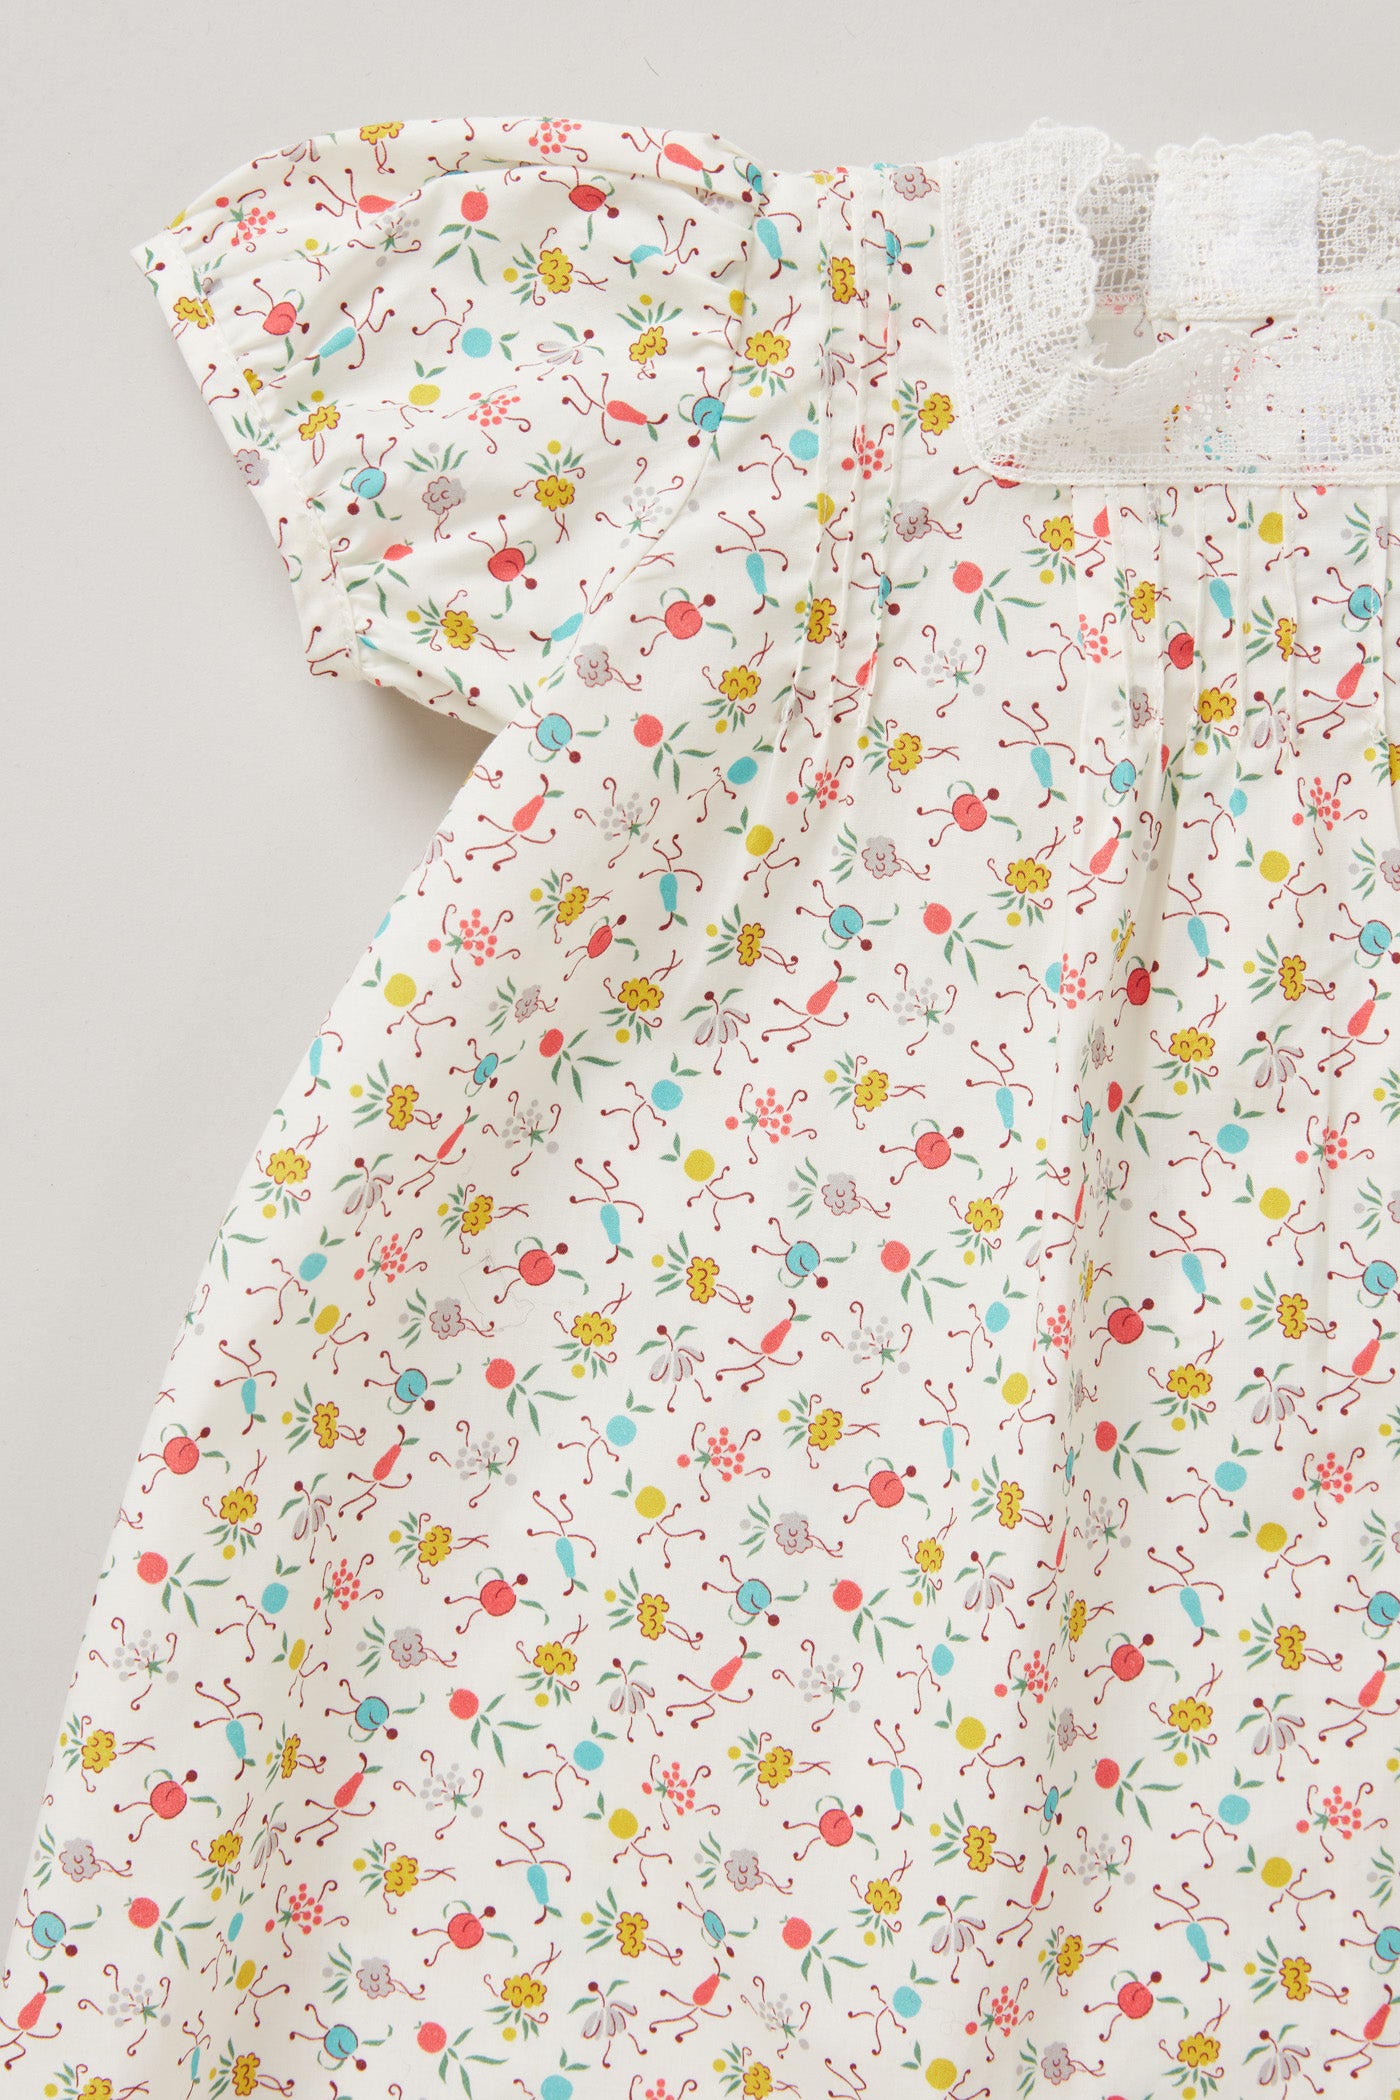 Baby Lullaby Dress In Happy Print